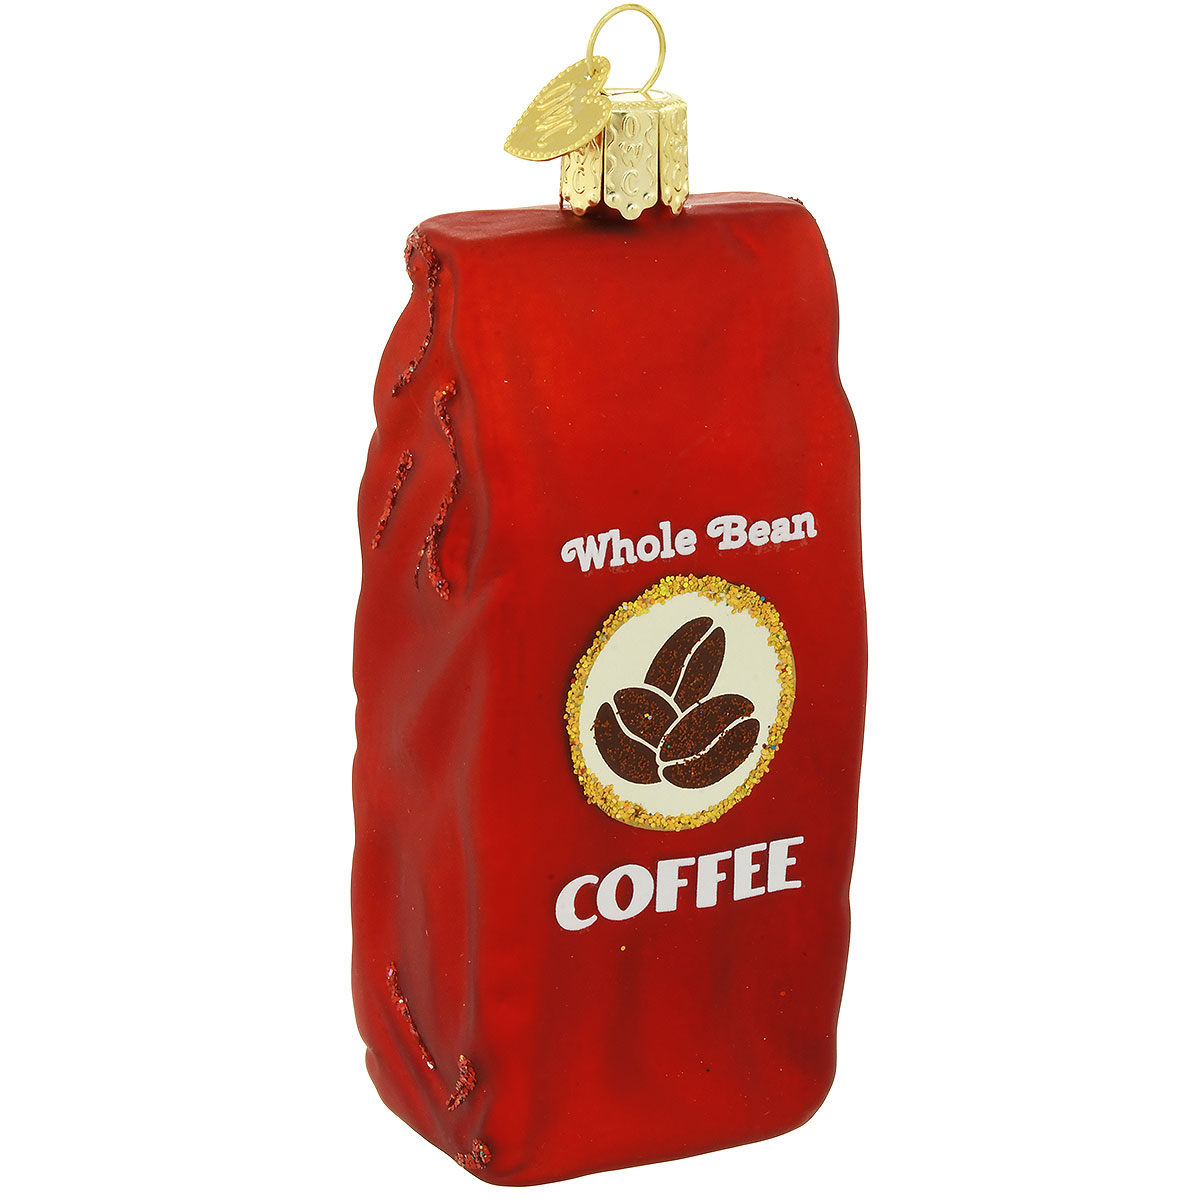 Bag Of Coffee Beans Ornament